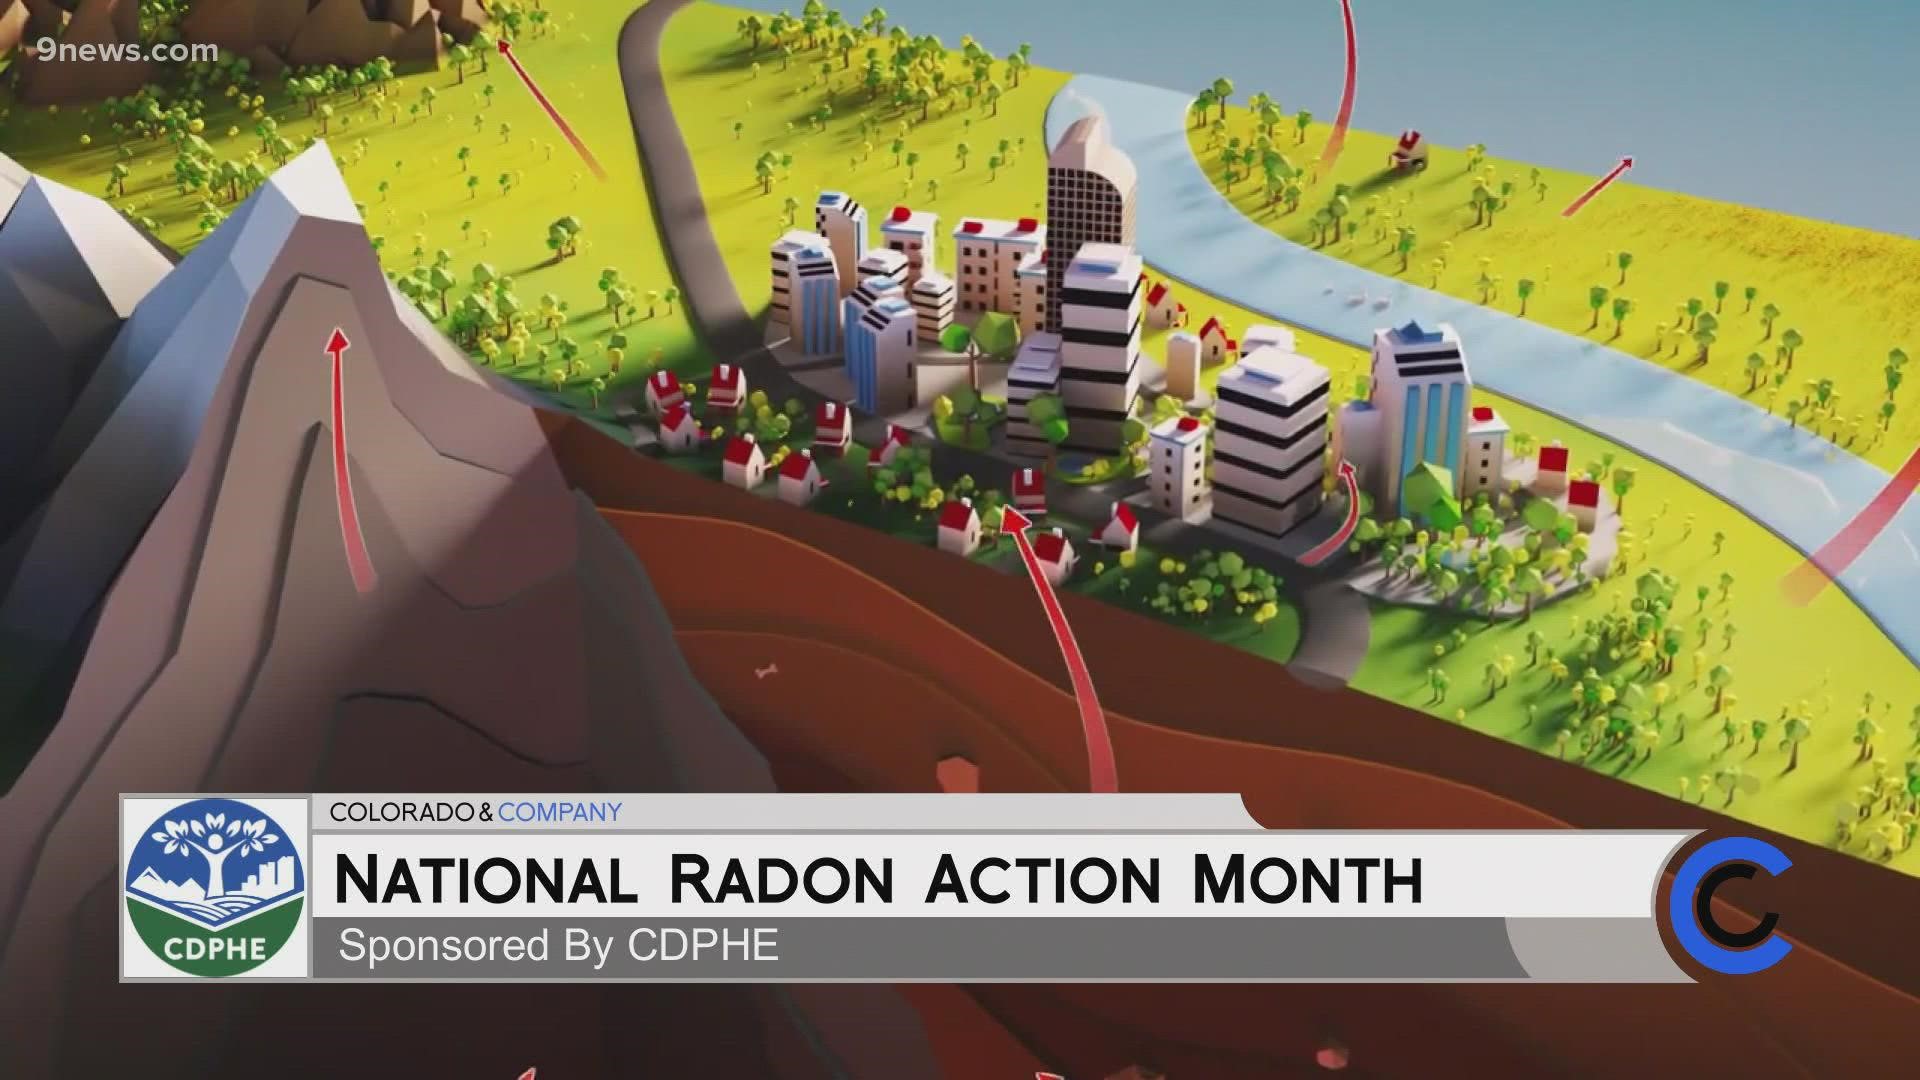 Learn more about Radon and take steps to mitigate any danger in your home. Learn more at ColoradoRadon.info. **PAID CONTENT**